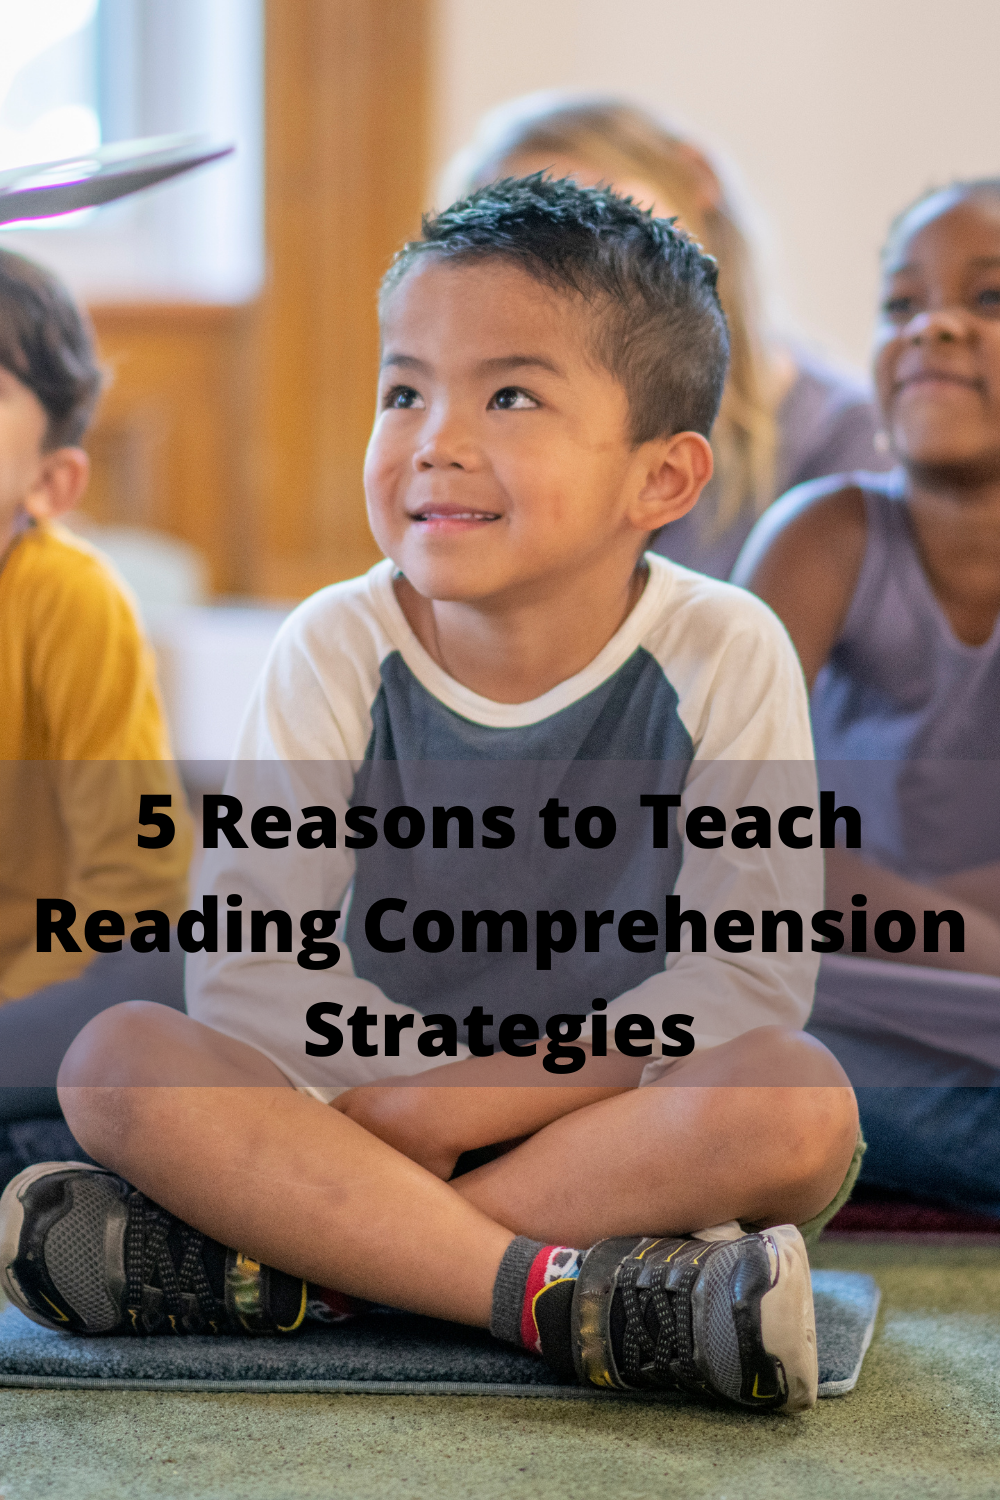 a boy sitting smiling with the words 5 reasons to teach reading comprehension strategies